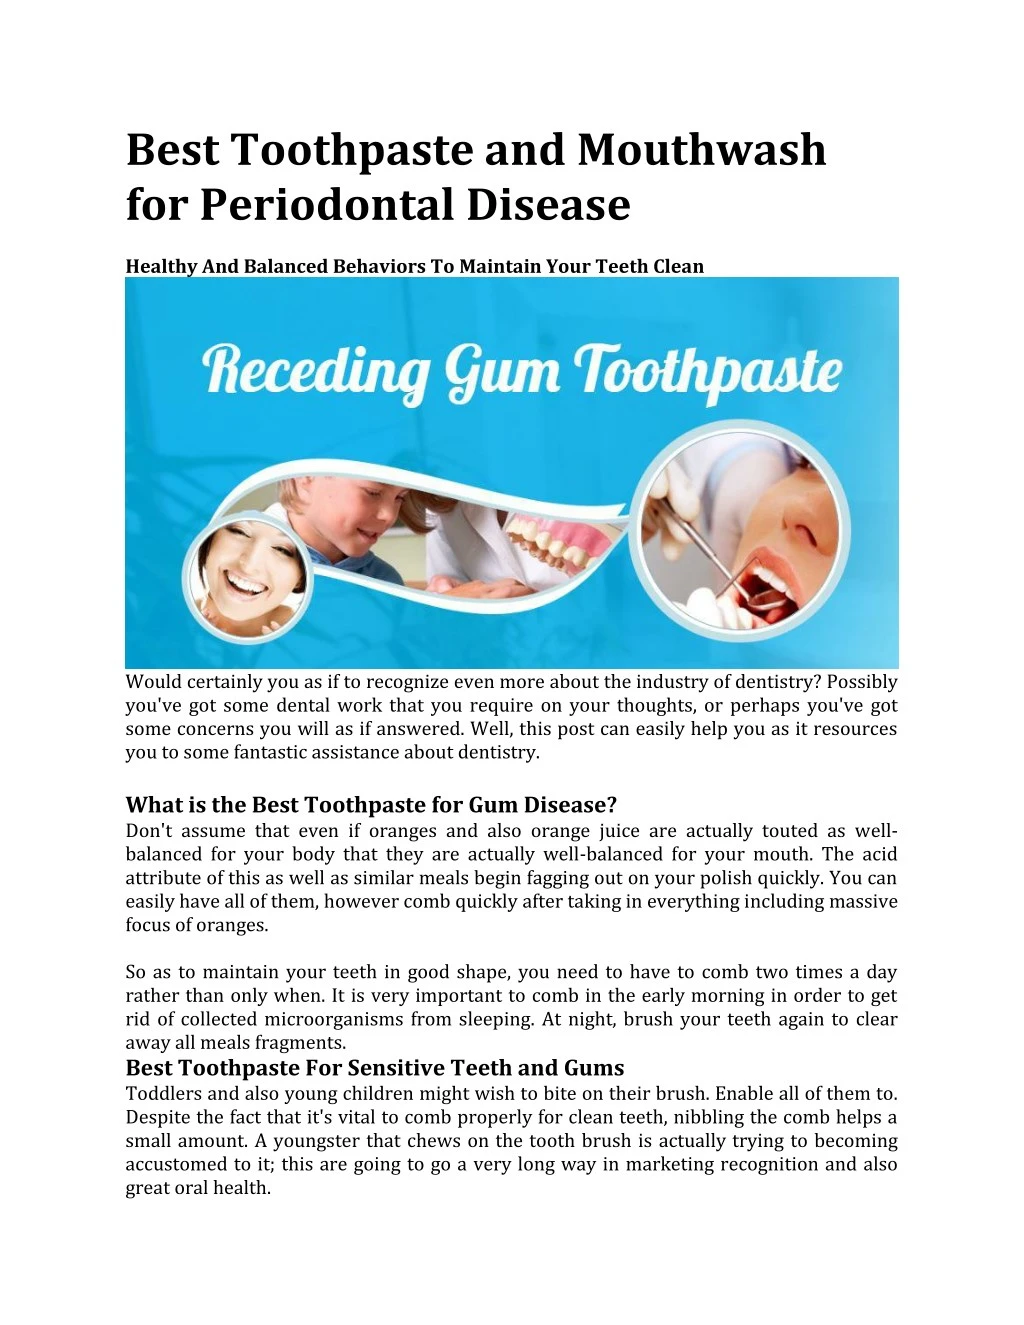 best toothpaste and mouthwash for periodontal